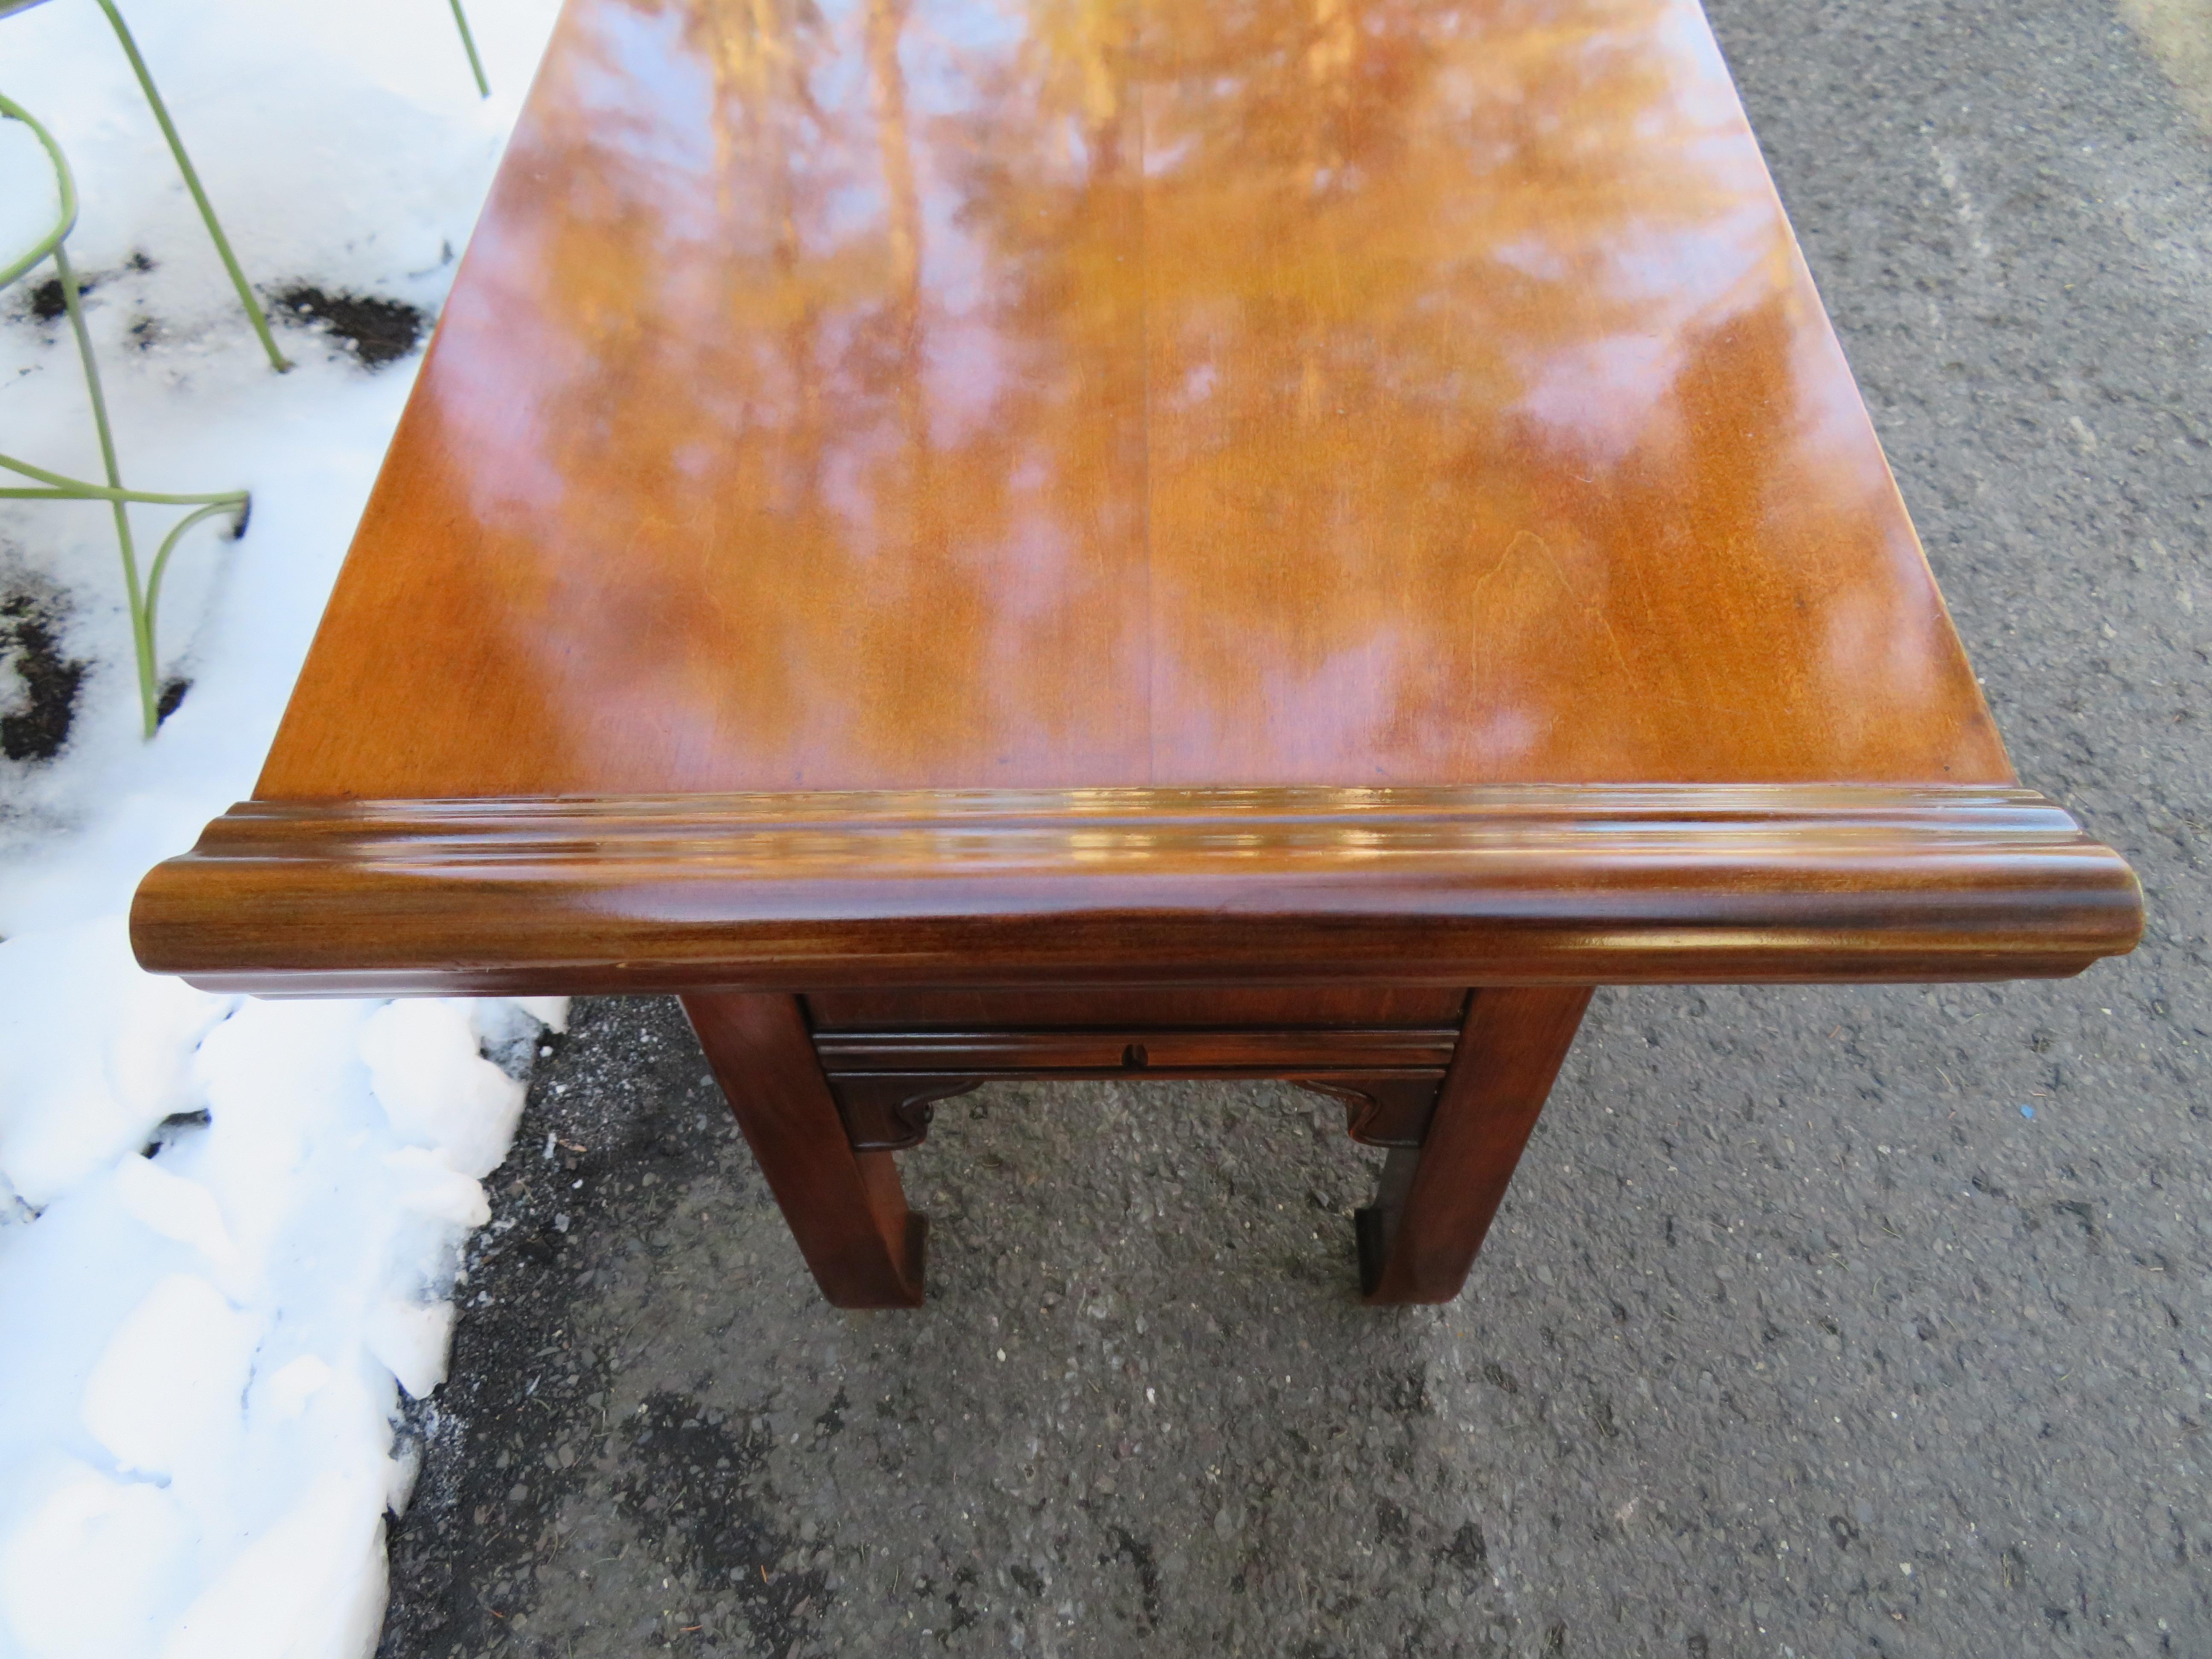 Stunning Bernhardt Asian Chinoiserie Alter Table Console Campaign Midcentury In Good Condition For Sale In Pemberton, NJ